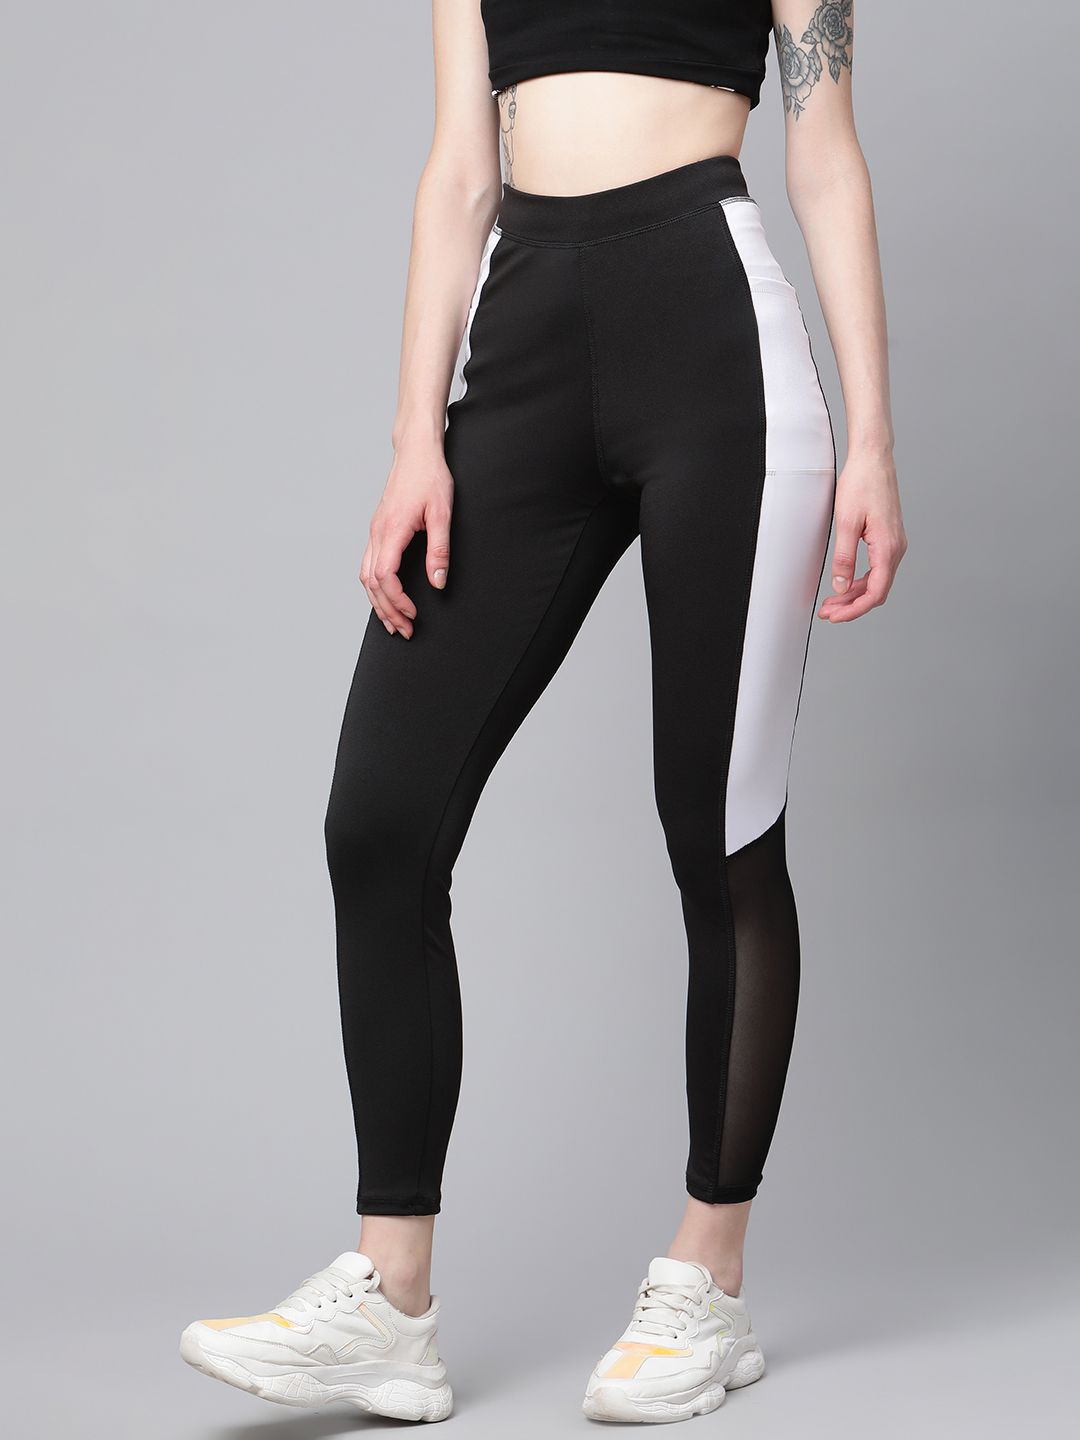 Blinkin Women Black & White Mesh Tights with Side Pockets Price in India